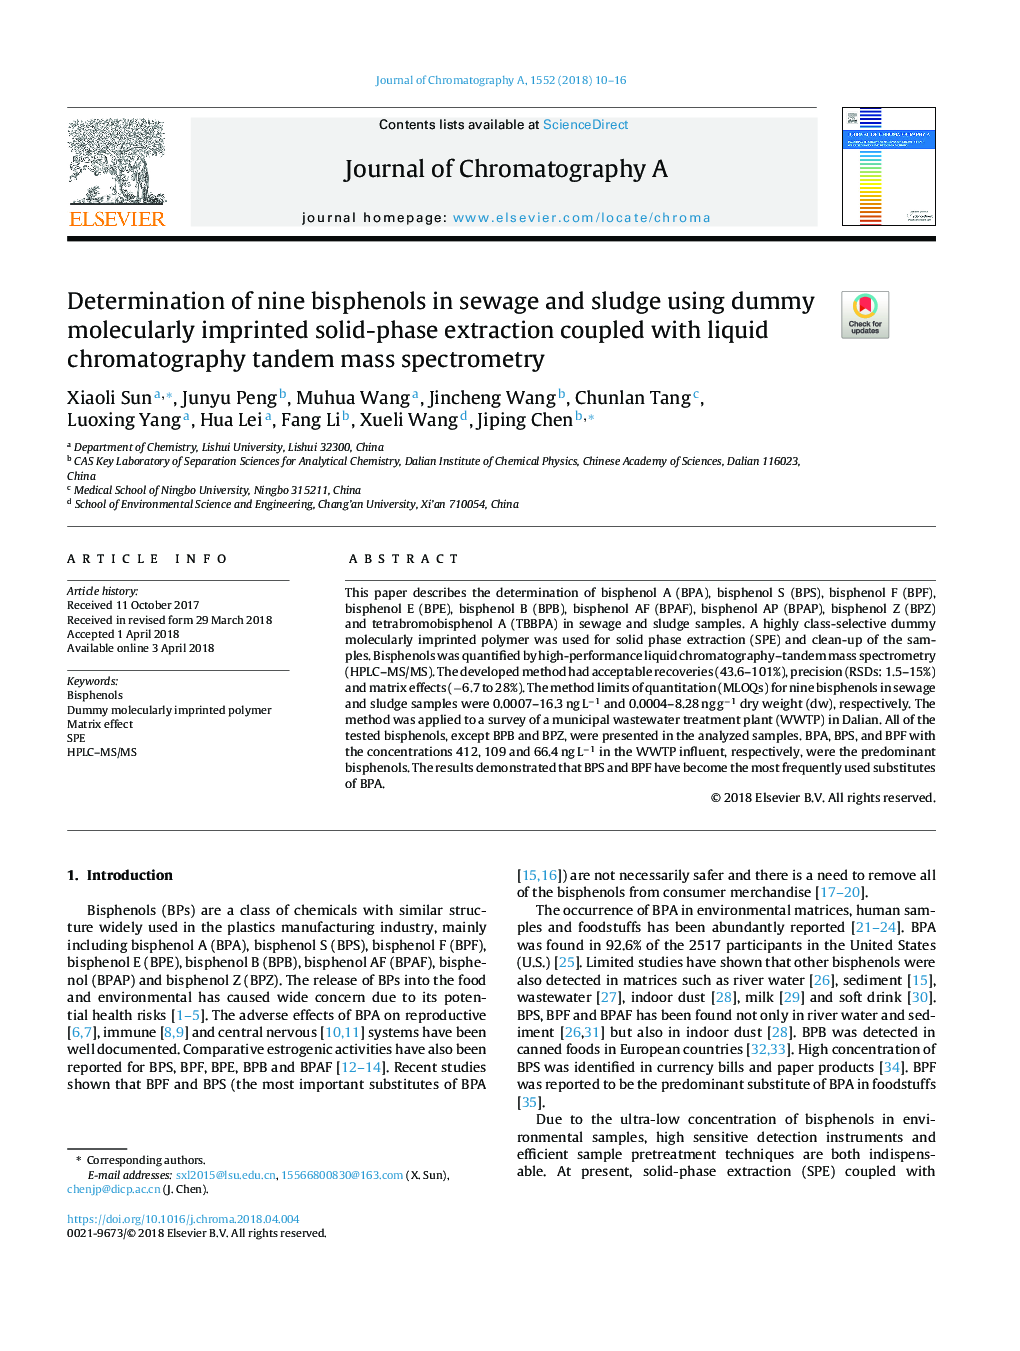 Determination of nine bisphenols in sewage and sludge using dummy molecularly imprinted solid-phase extraction coupled with liquid chromatography tandem mass spectrometry